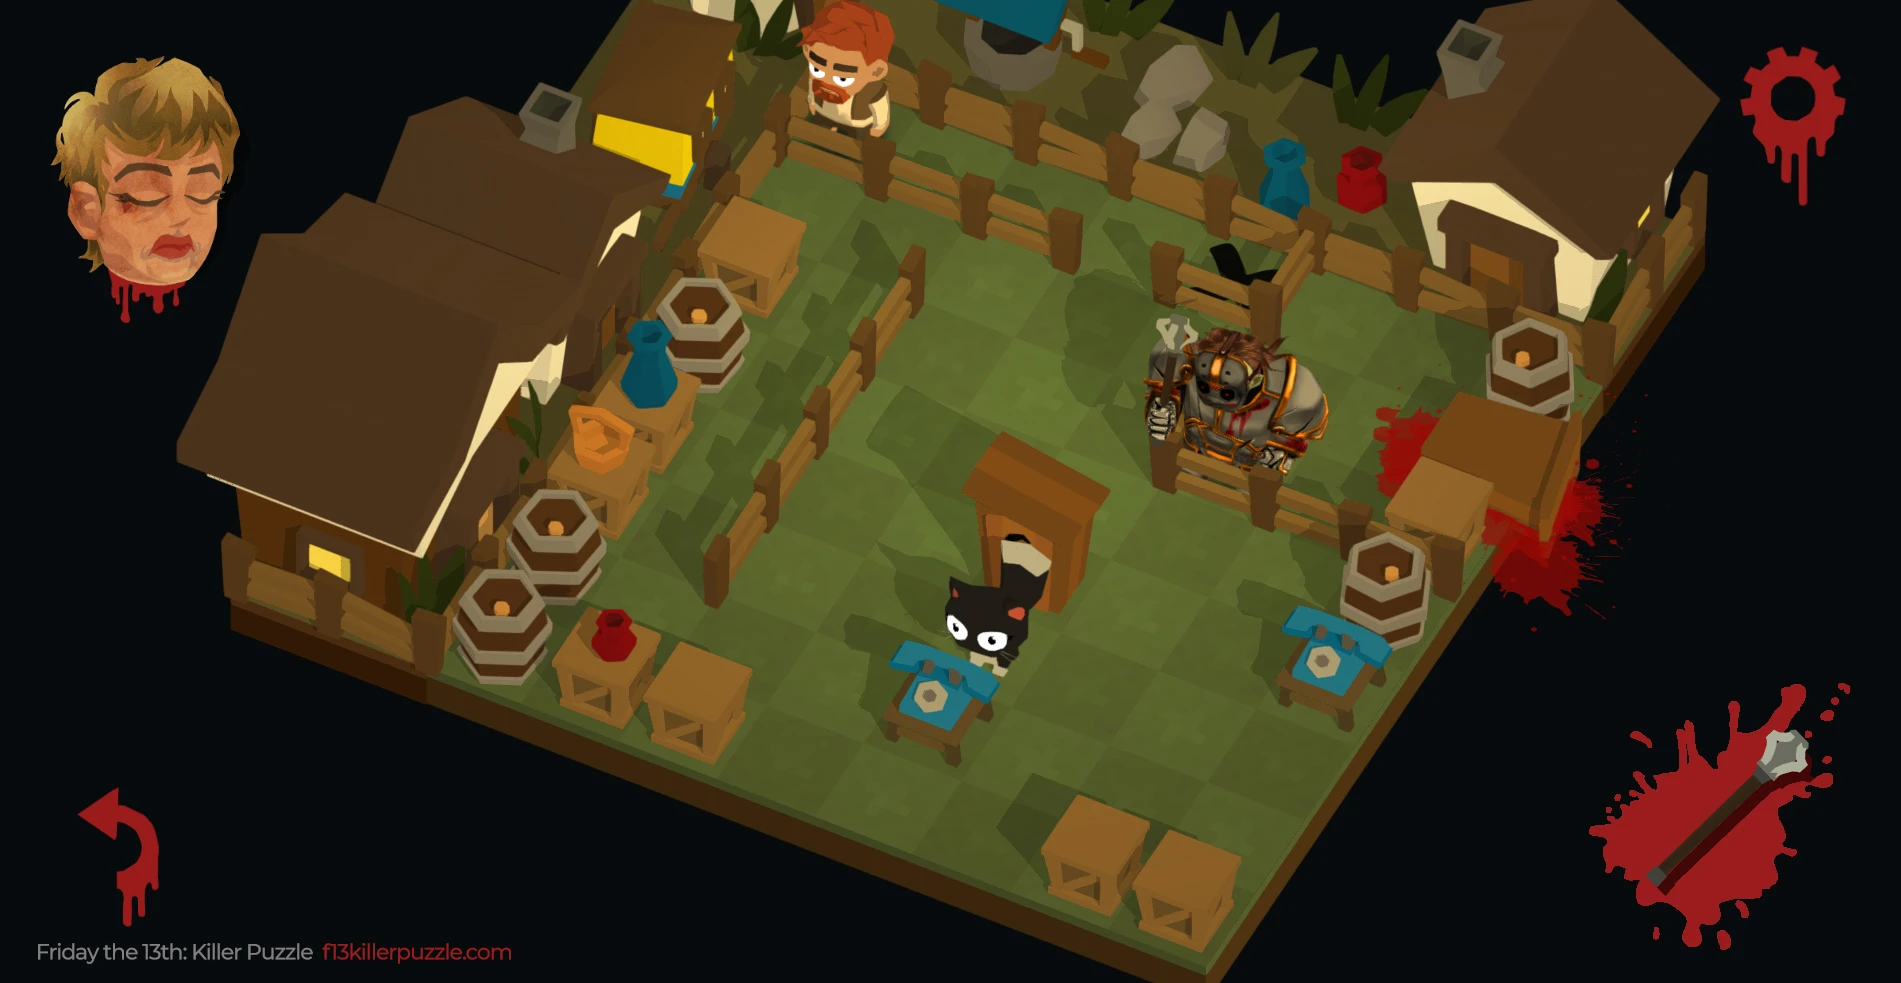 Friday the 13th: Killer Puzzle Indie Game - Geeky Hobbies